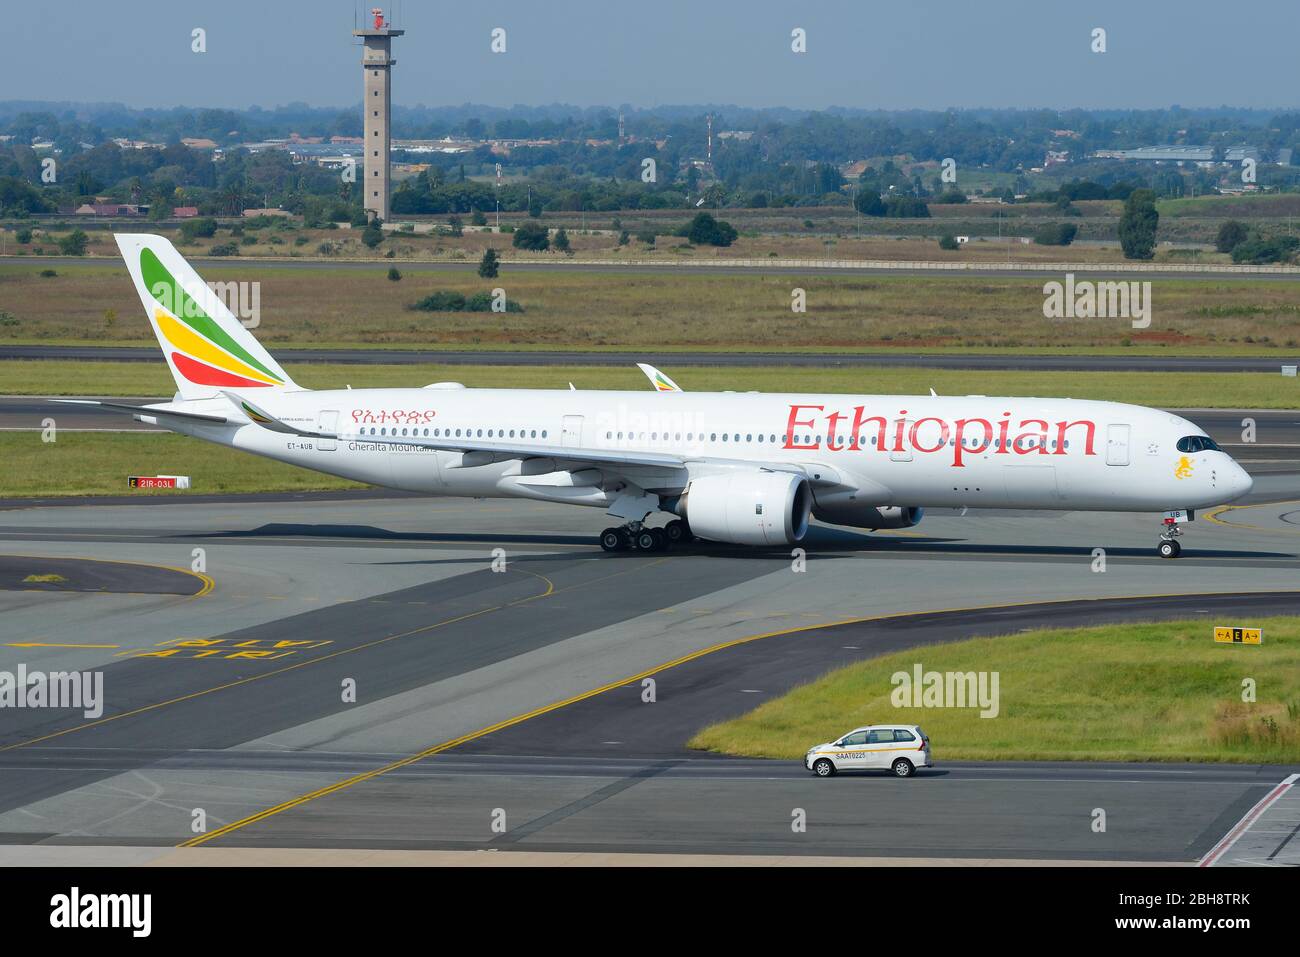 Ethiopian Airlines Airbus A350 before departure to Addis Abeba, Ethiopia. A350-900 aircraft registered as ET-AUB at O. R. Tambo International Airport. Stock Photo